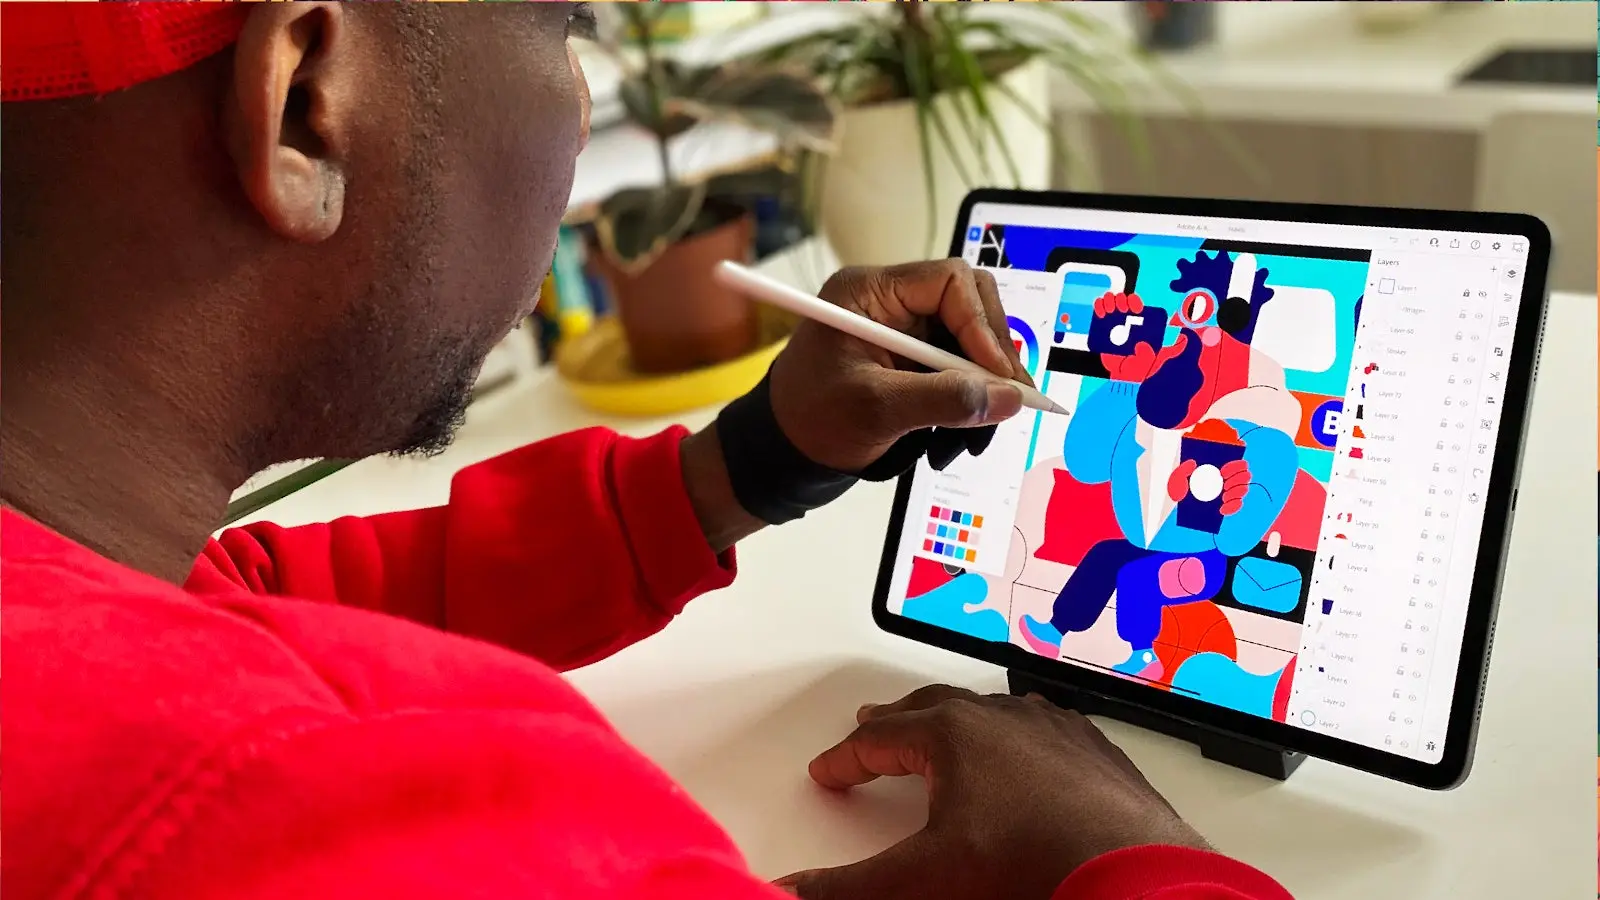 A man is shown drawing a vector illustration on Illustrator on the iPad.